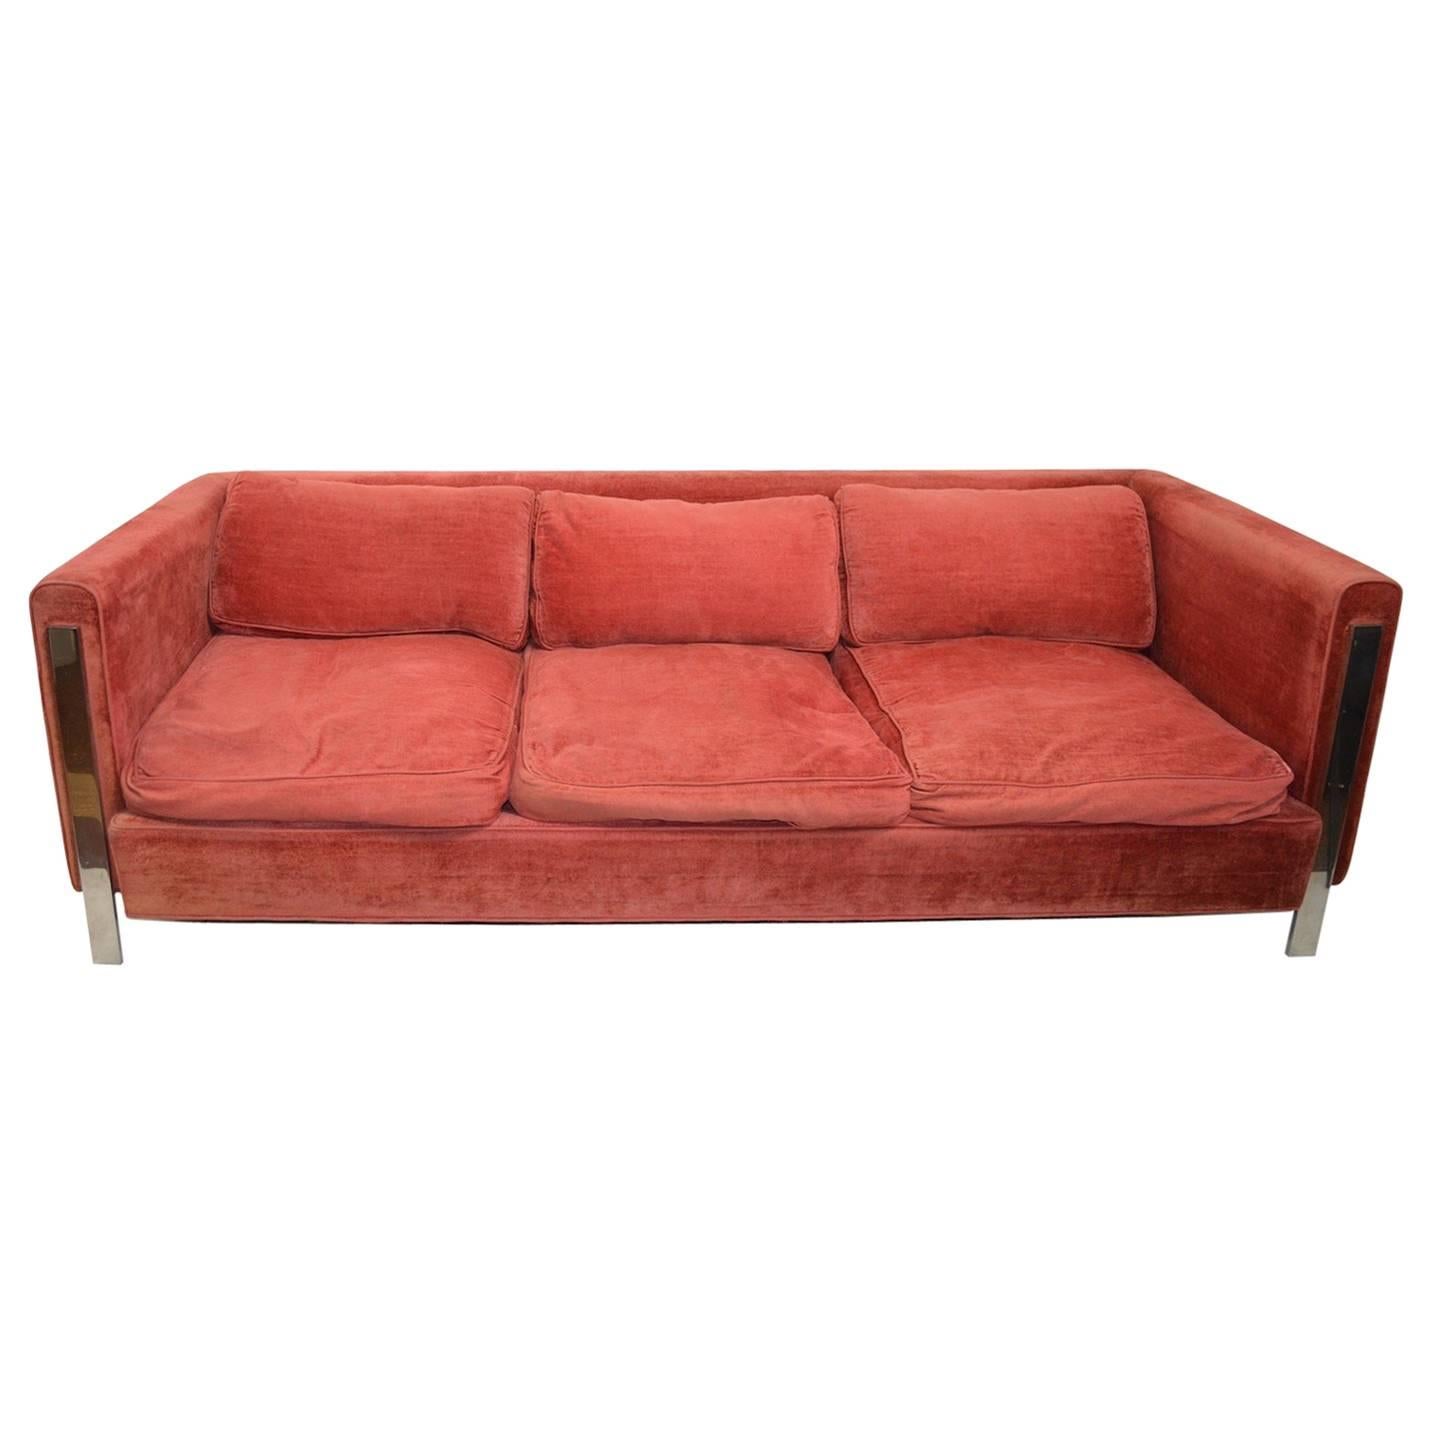 Chrome and Velvet Sofa Attributed to Baughman